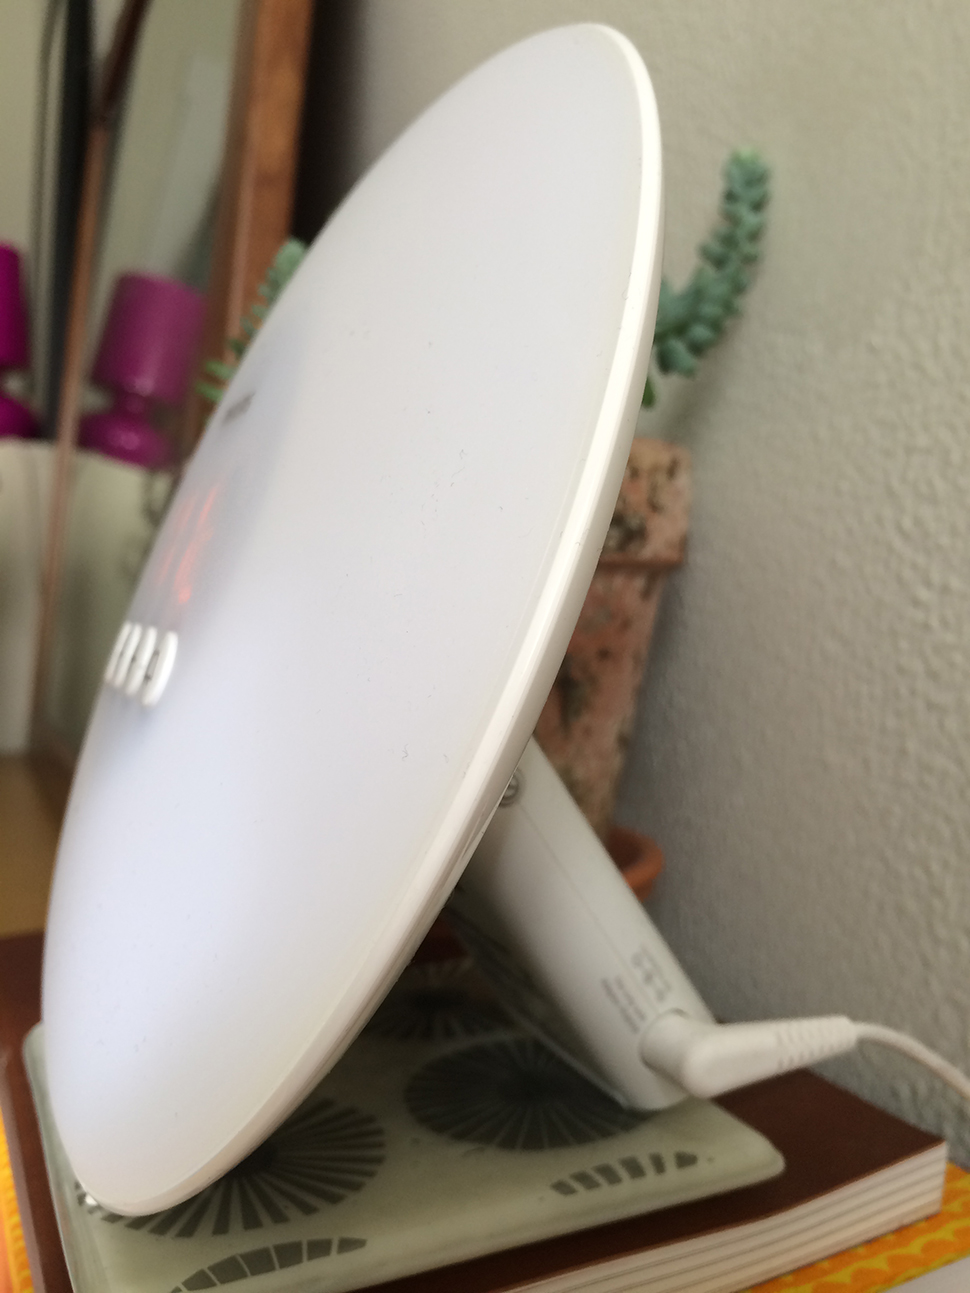 A Light-Up Alarm Completely Changed My Life